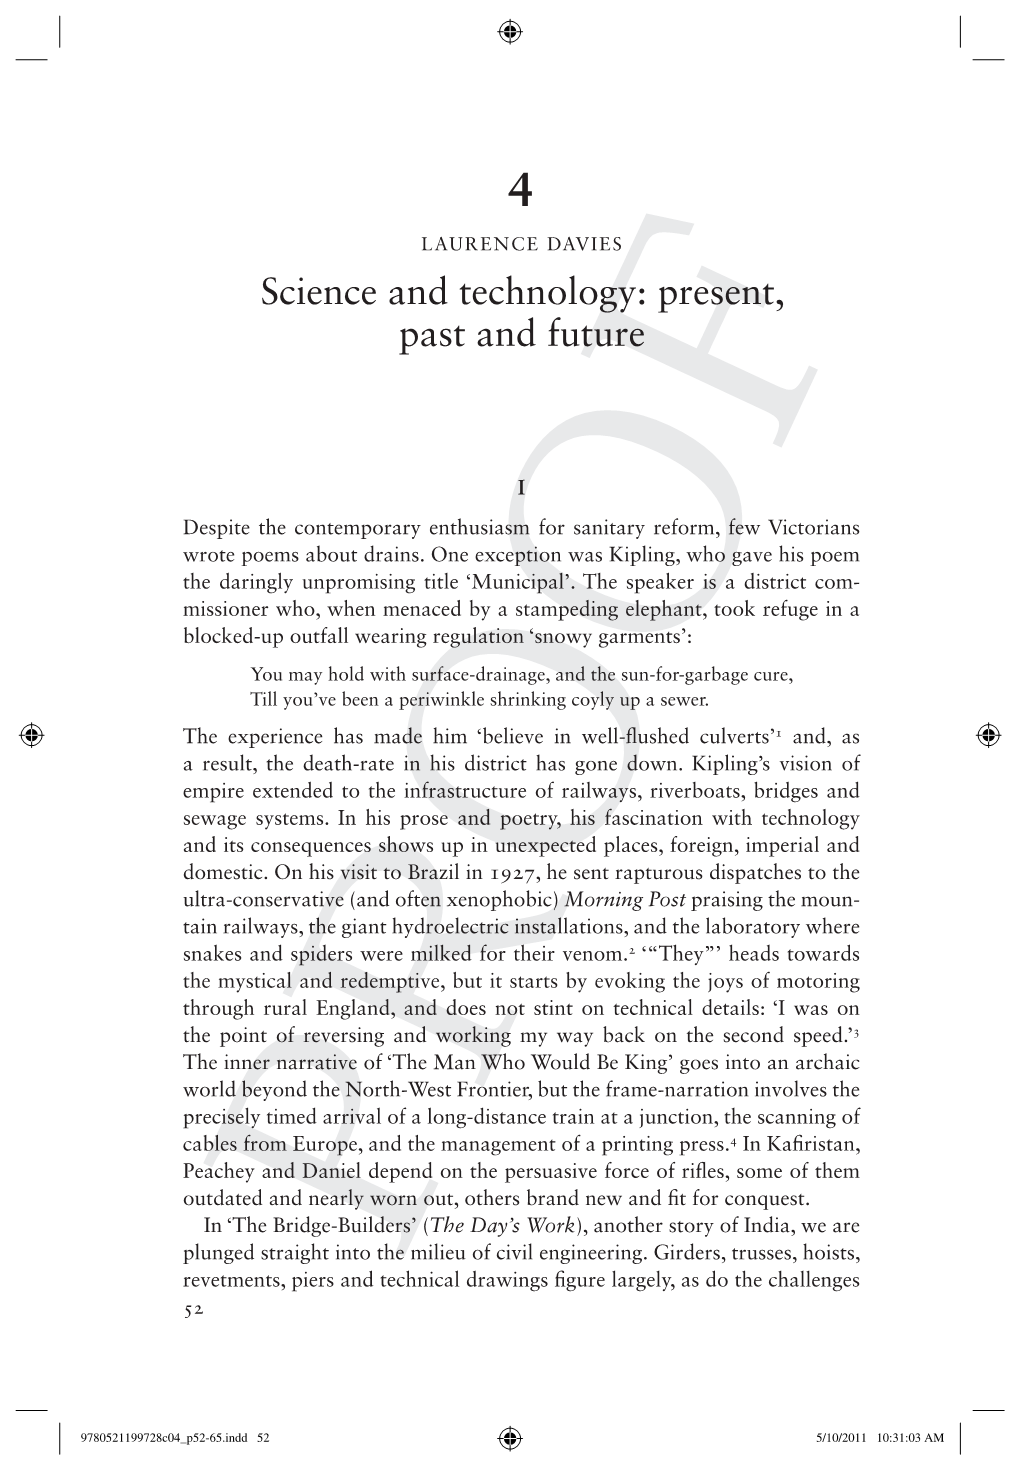 Science and Technology: Present, Past and Future